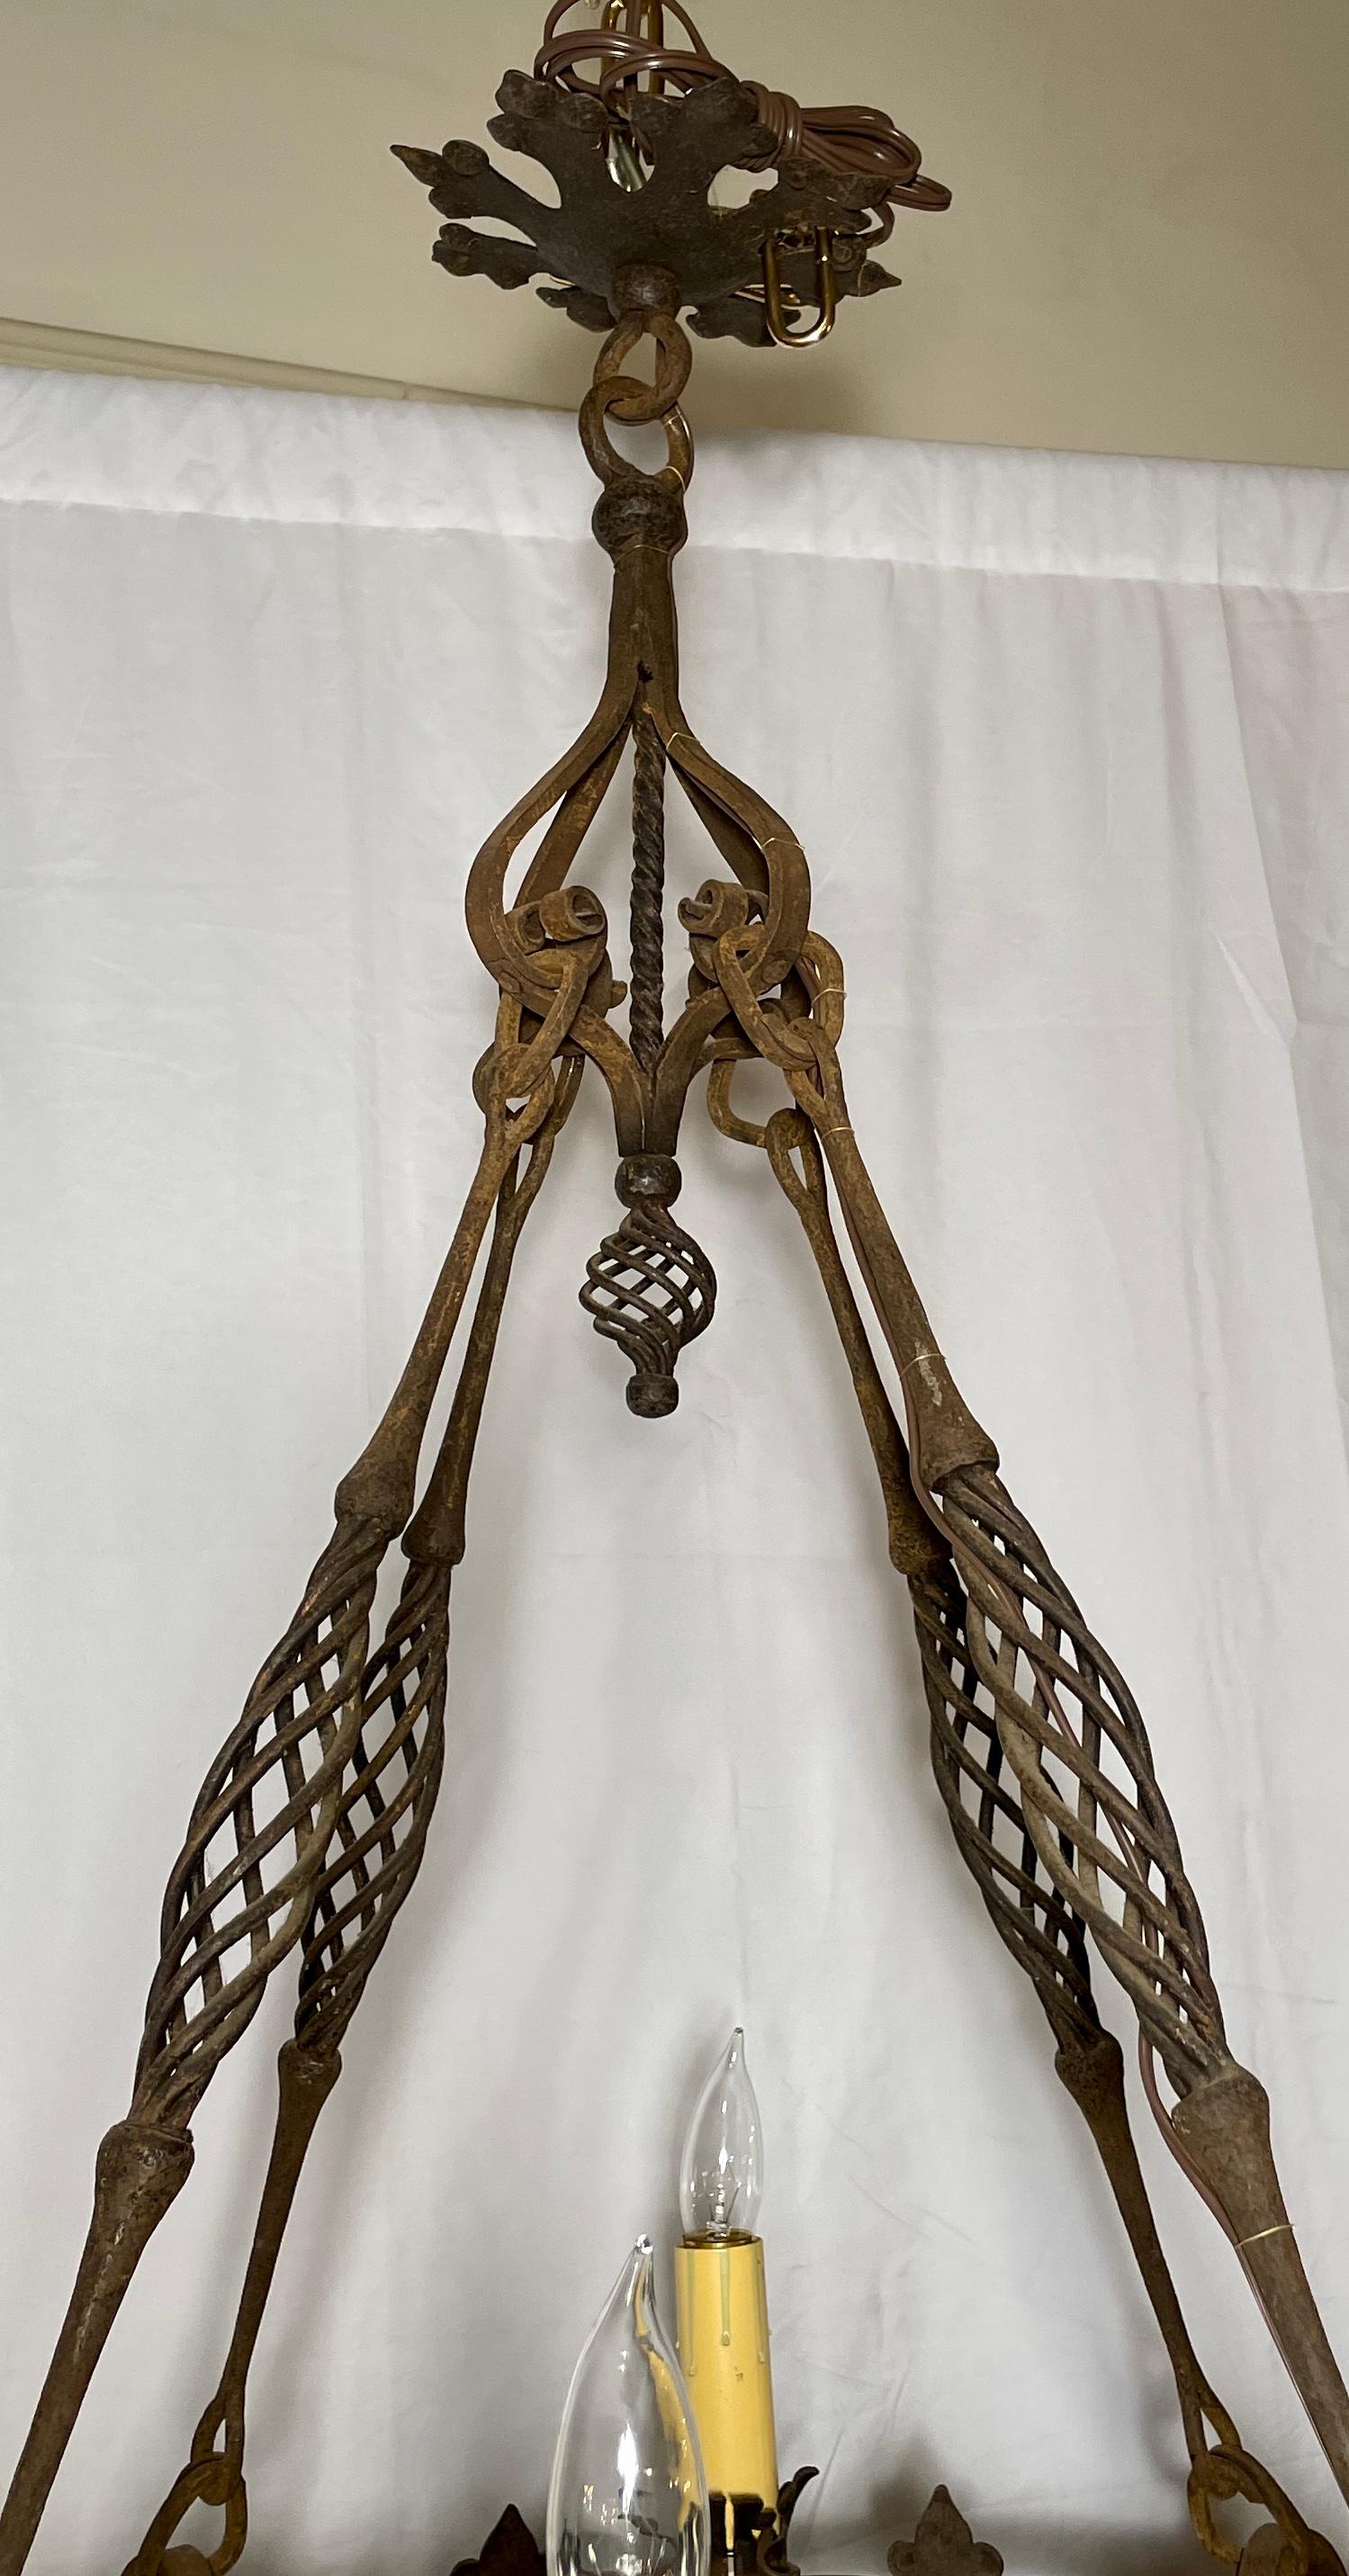 Antique French wrought iron 4 light chandelier, circa 1880.